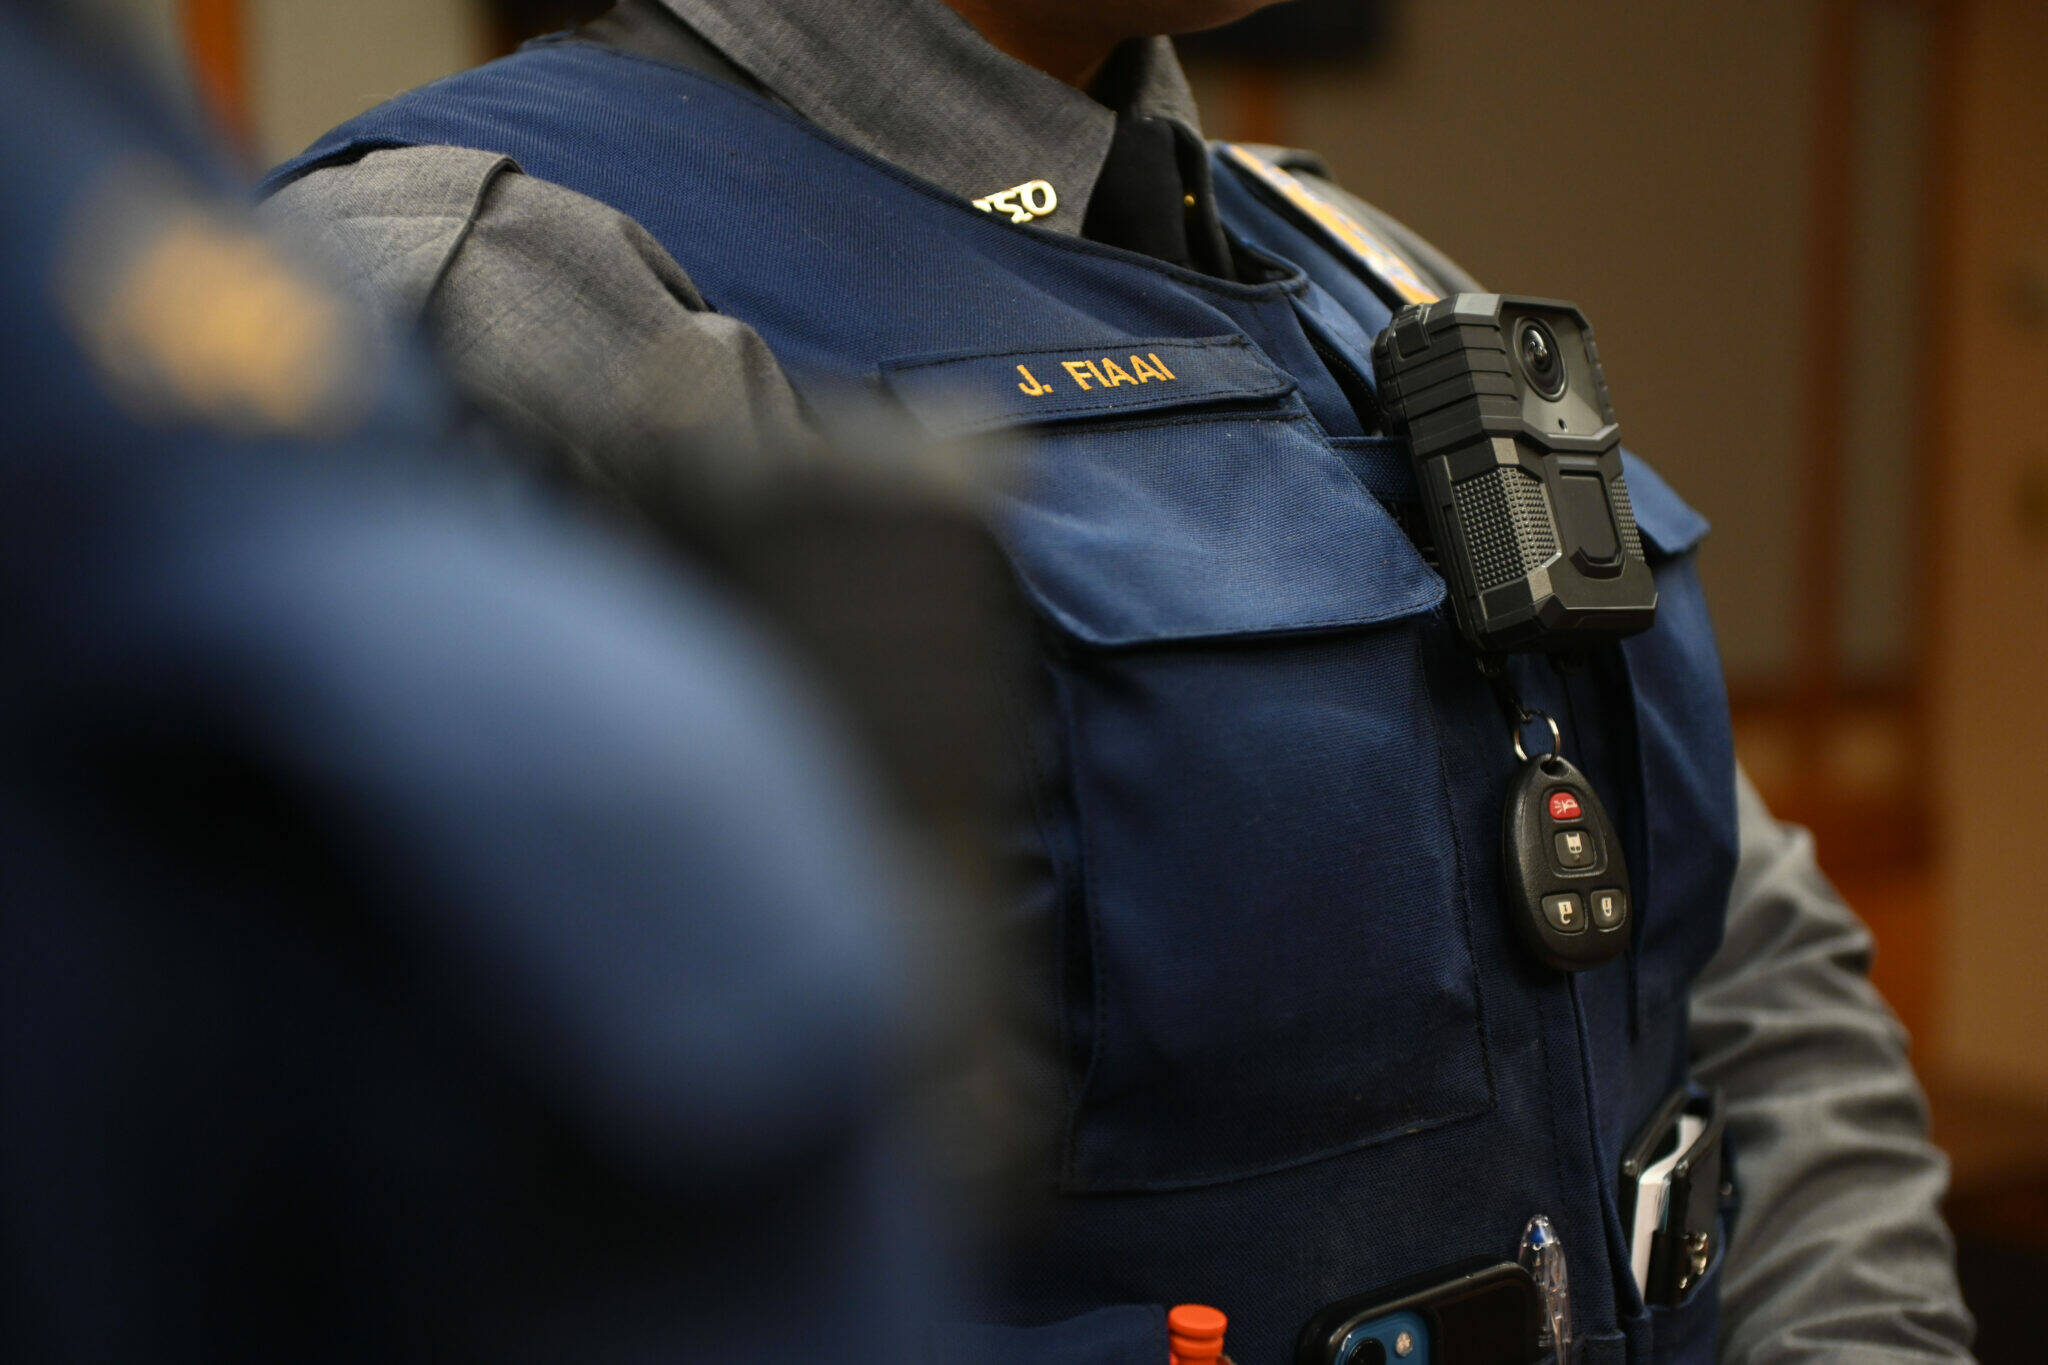 A court services officer is shown wearing a body camera. (Photo provided by Alaska Department of Public Safety)